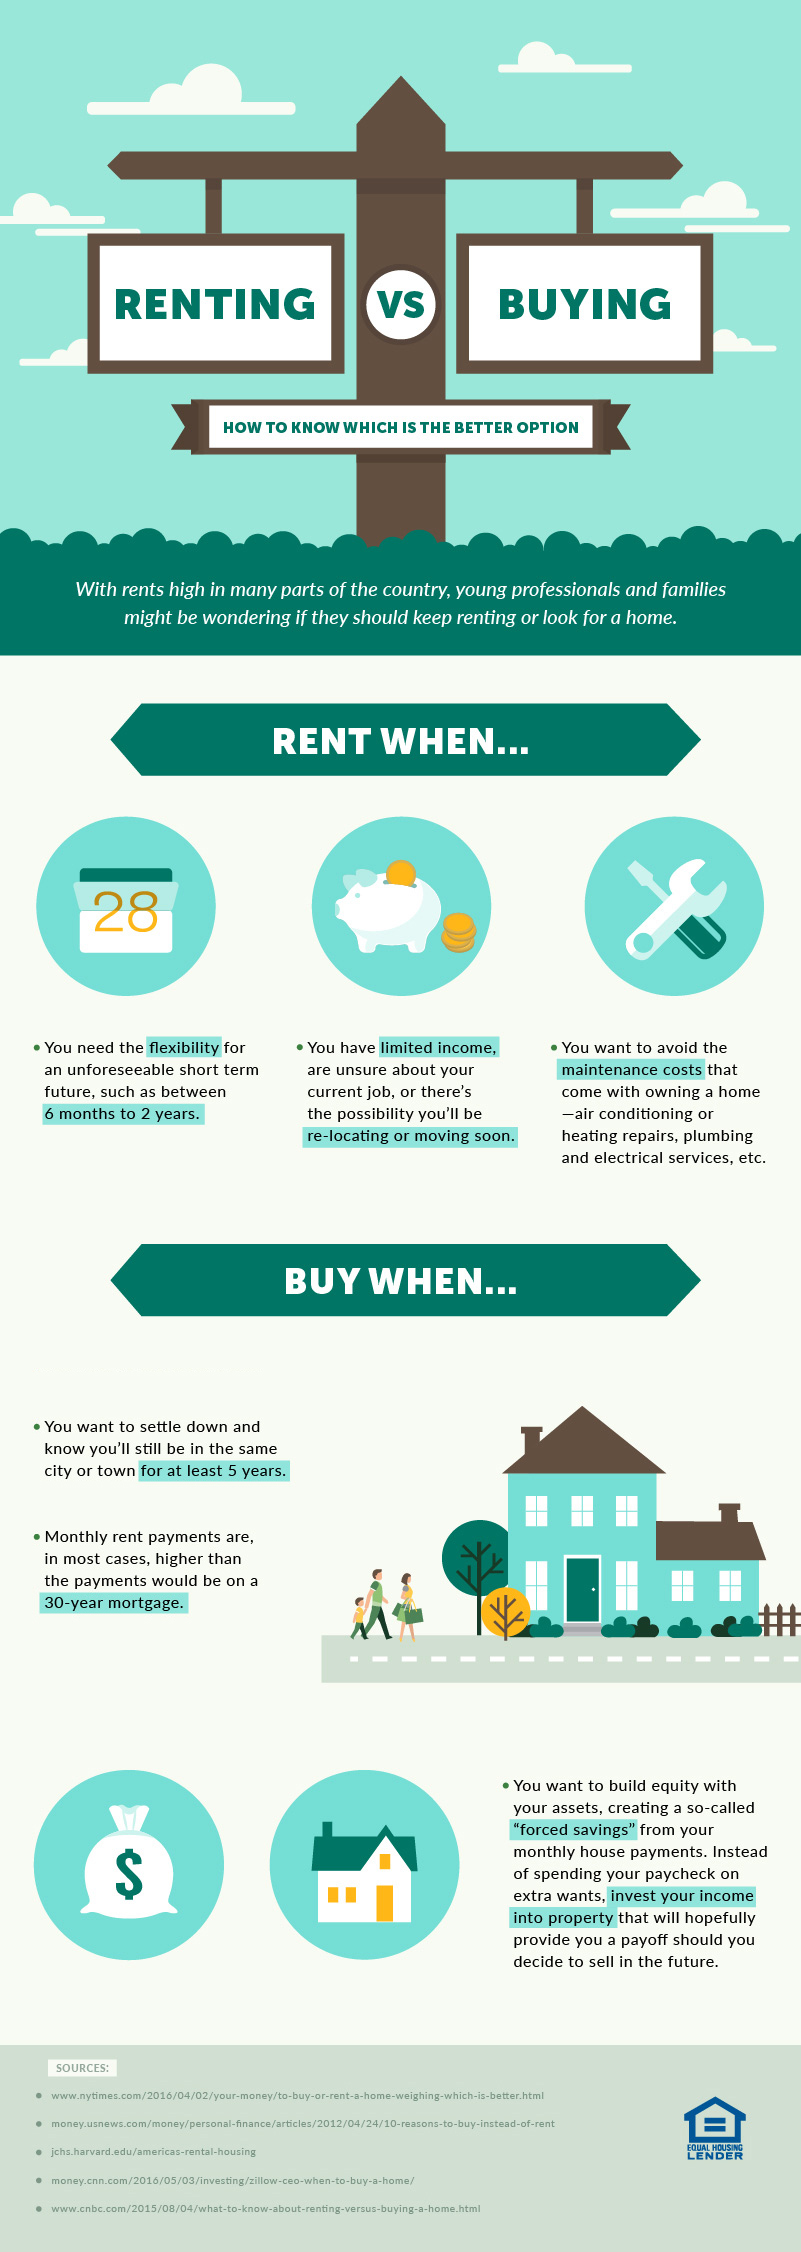 An infographic outlining ways to know whether you are fit to rent or buy